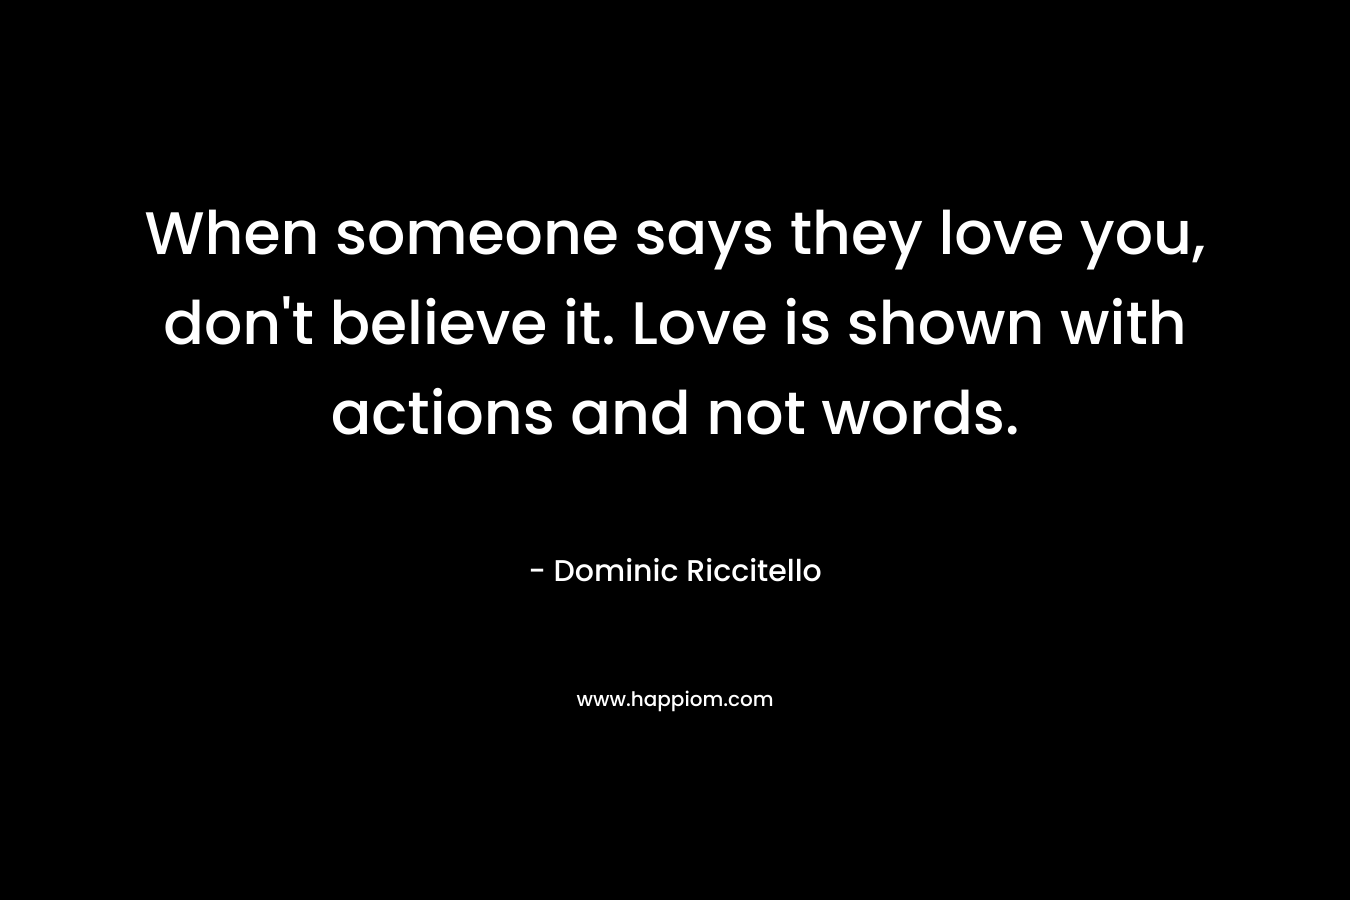 When someone says they love you, don't believe it. Love is shown with actions and not words.